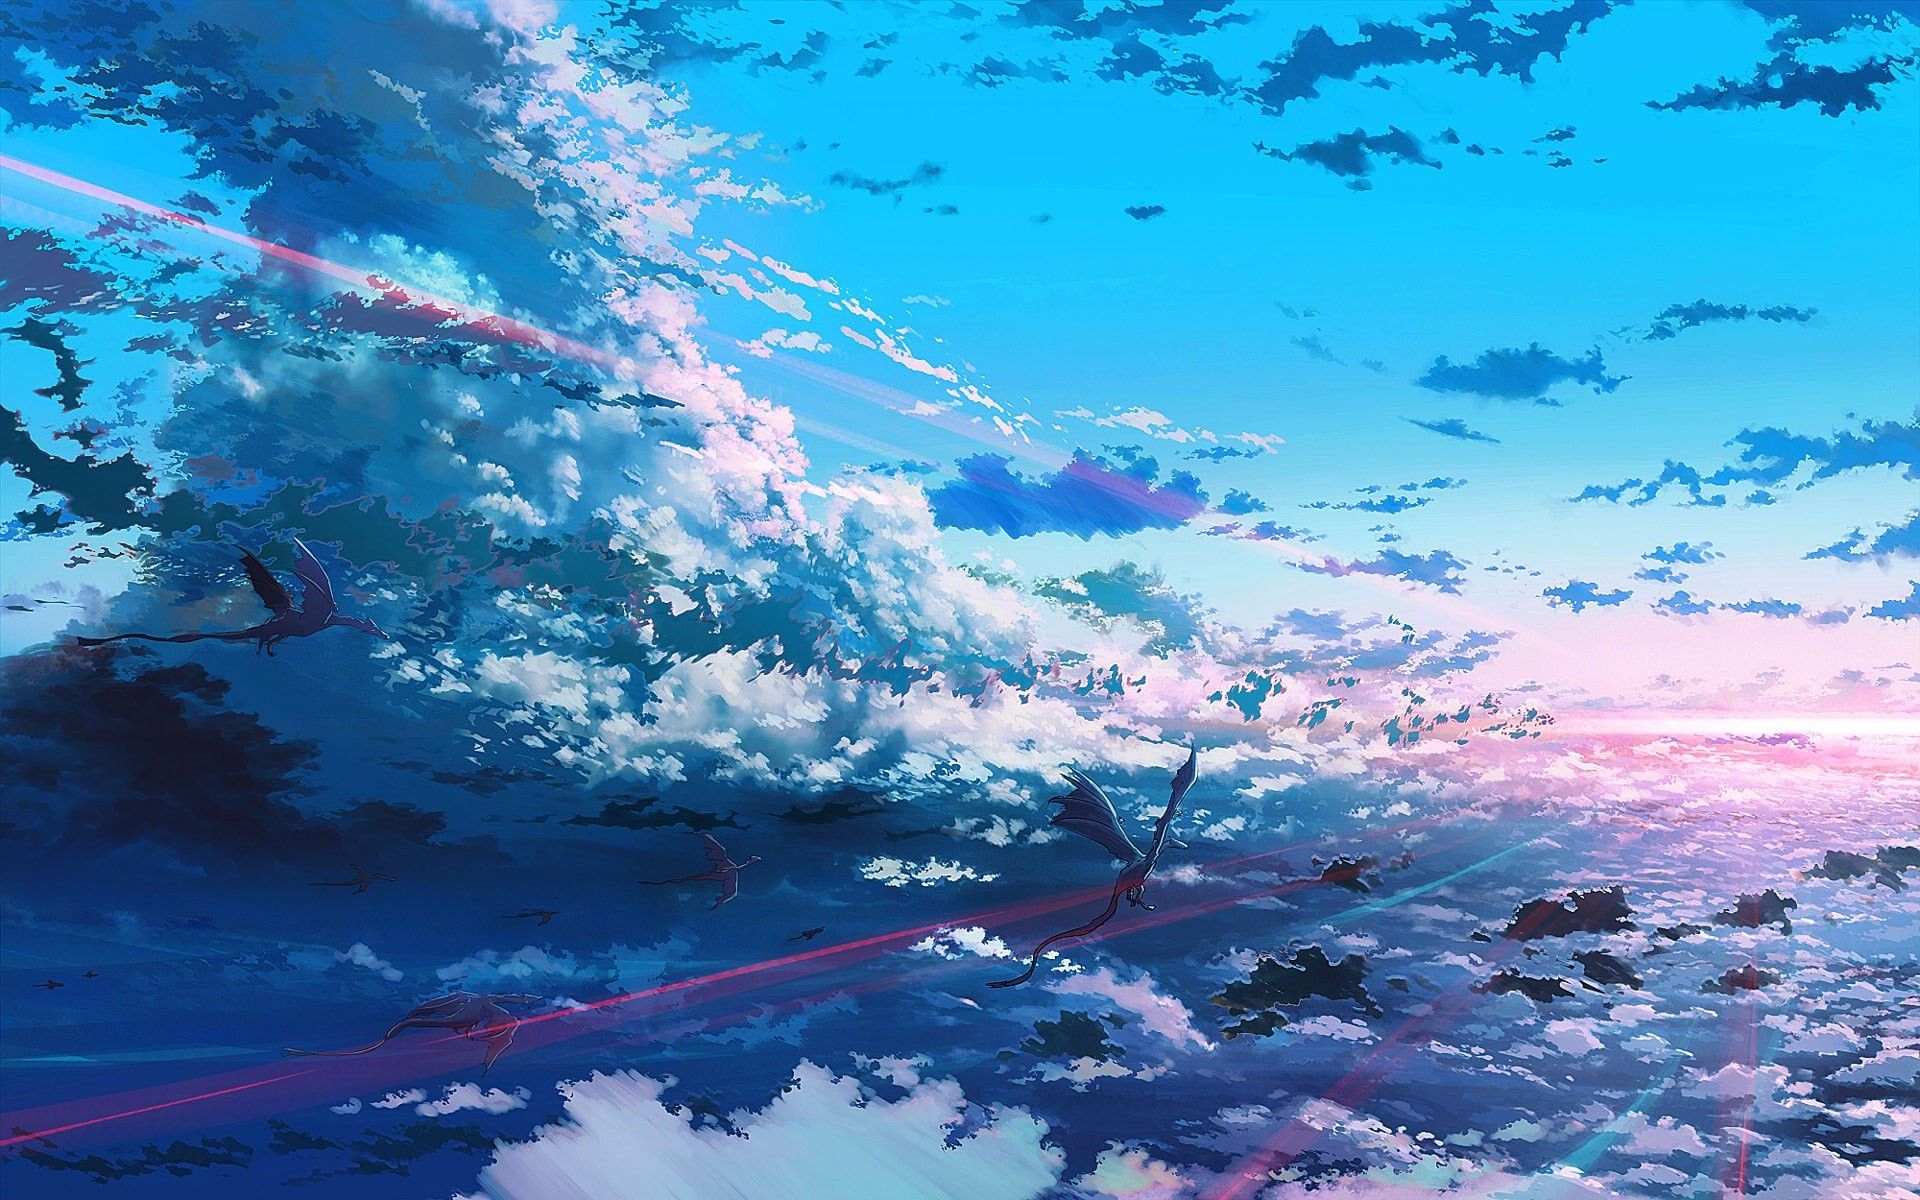 Your Name Anime Abstract Painting Wallpapers